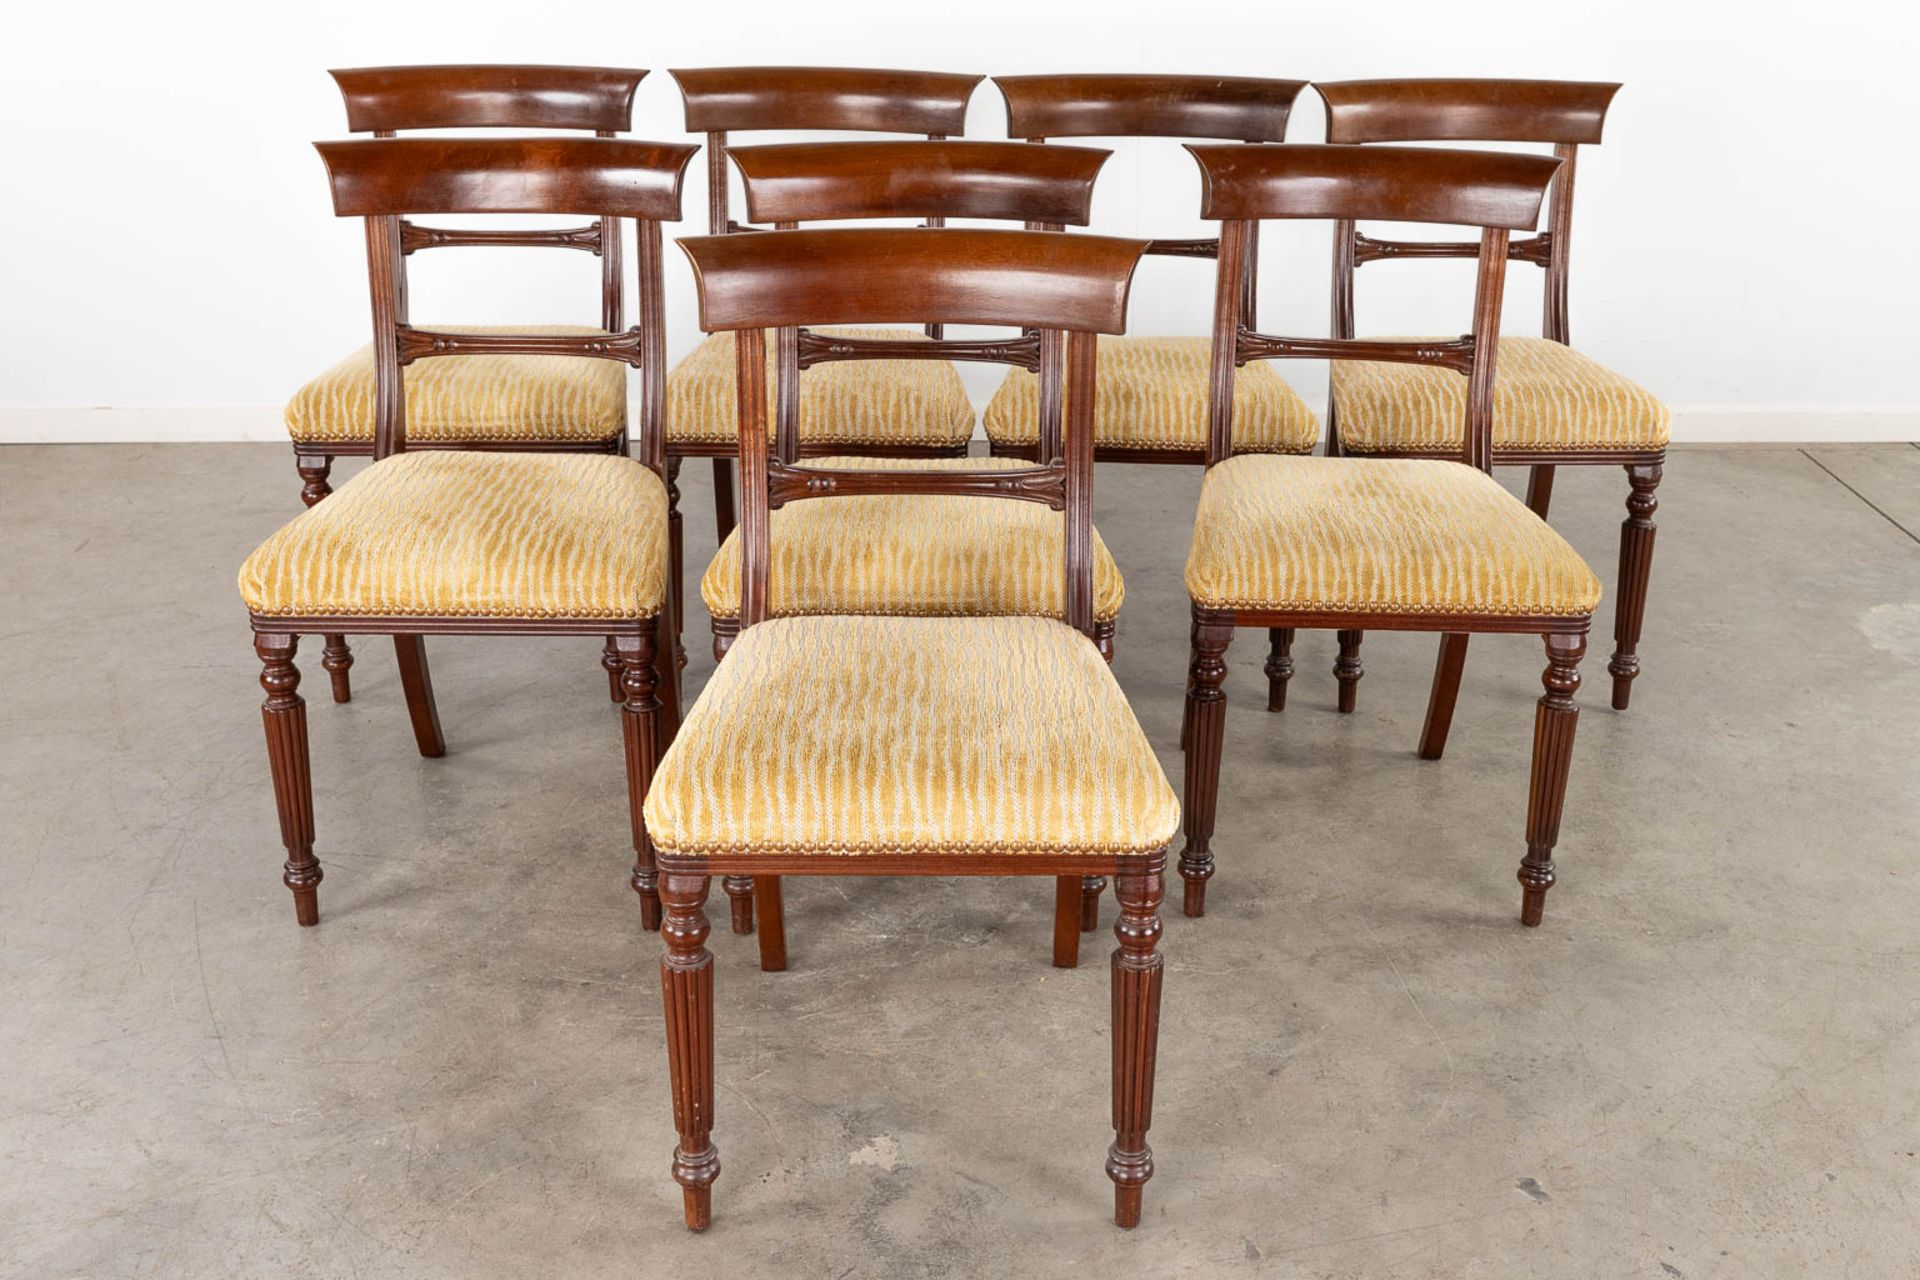 An extendible table, 6 chairs and two armchairs, Mahogany. England. 20th C. (D:144 x W:144 x H:75 cm - Image 17 of 22